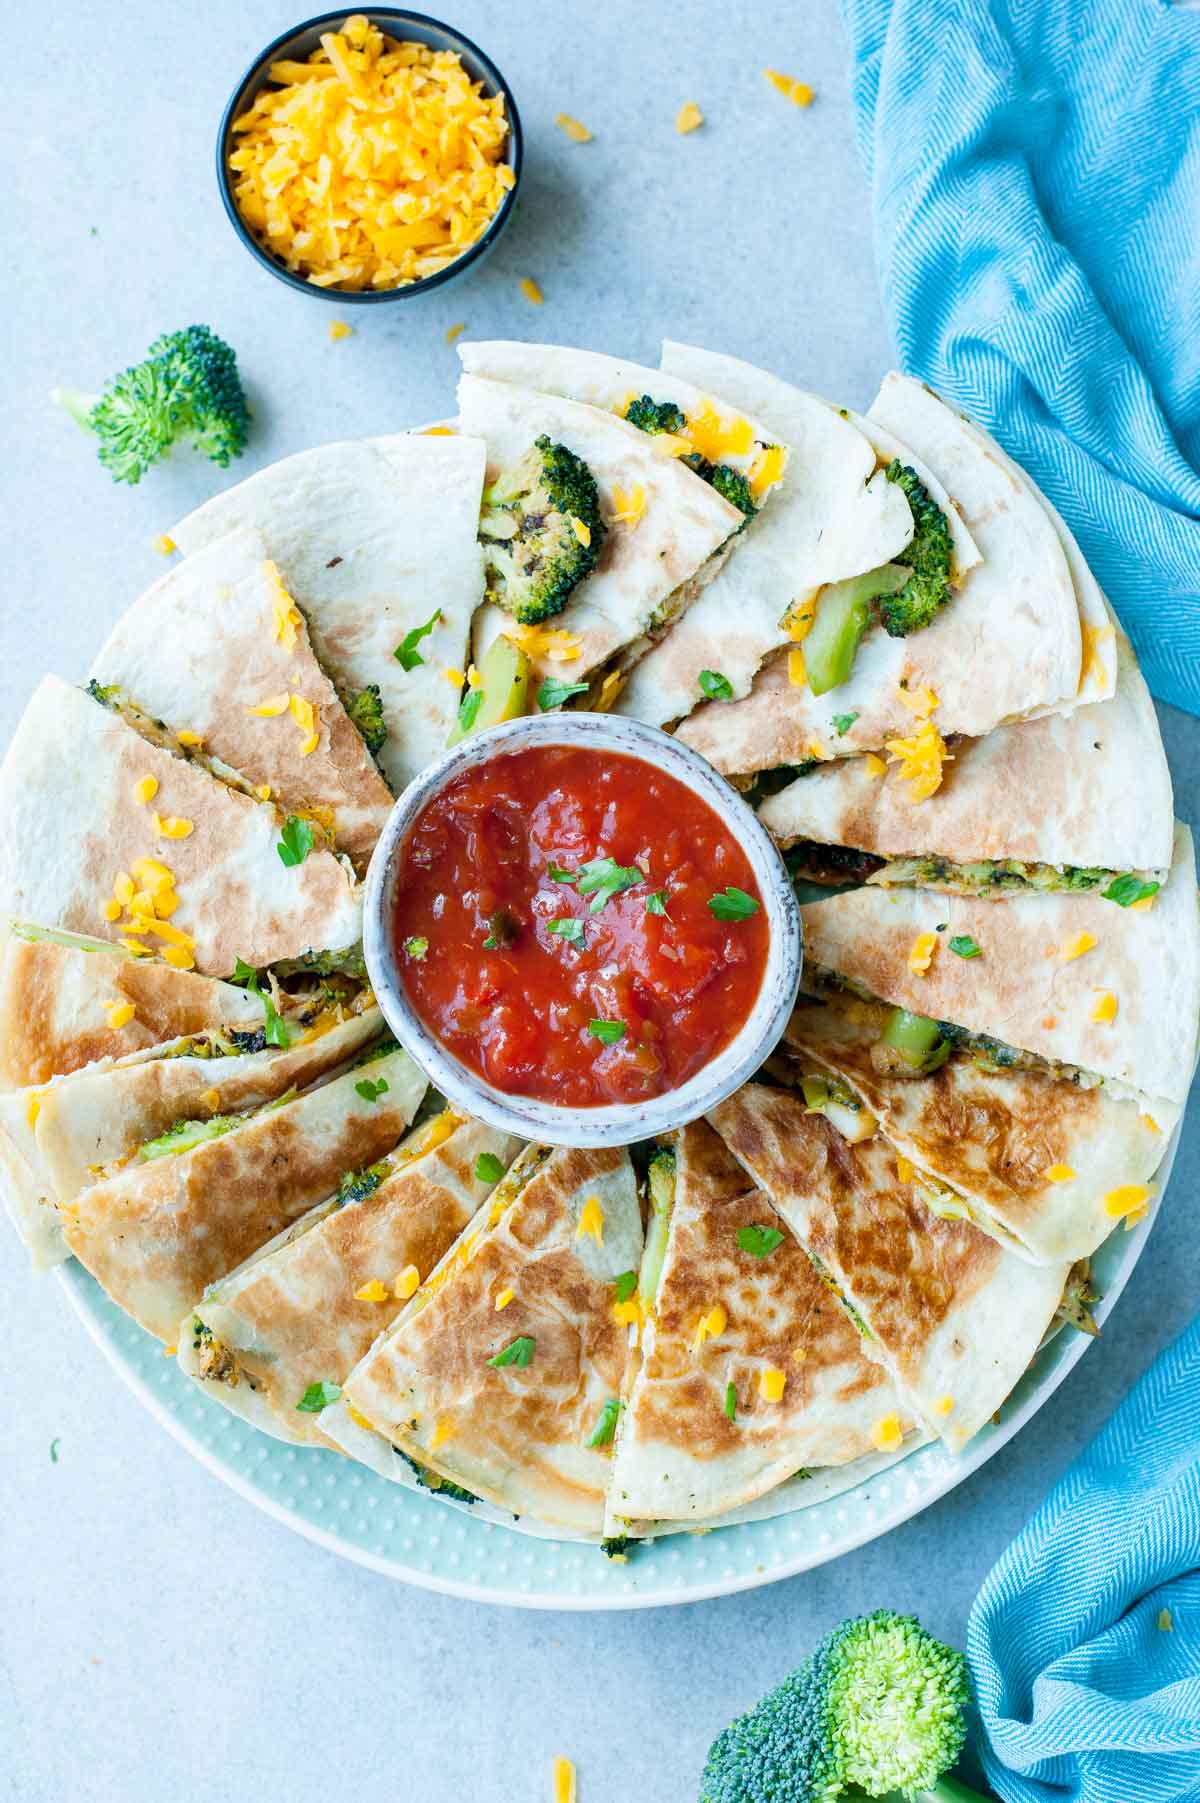 Broccoli quesadilla on a green plate with a small bowl with tomato salsa.